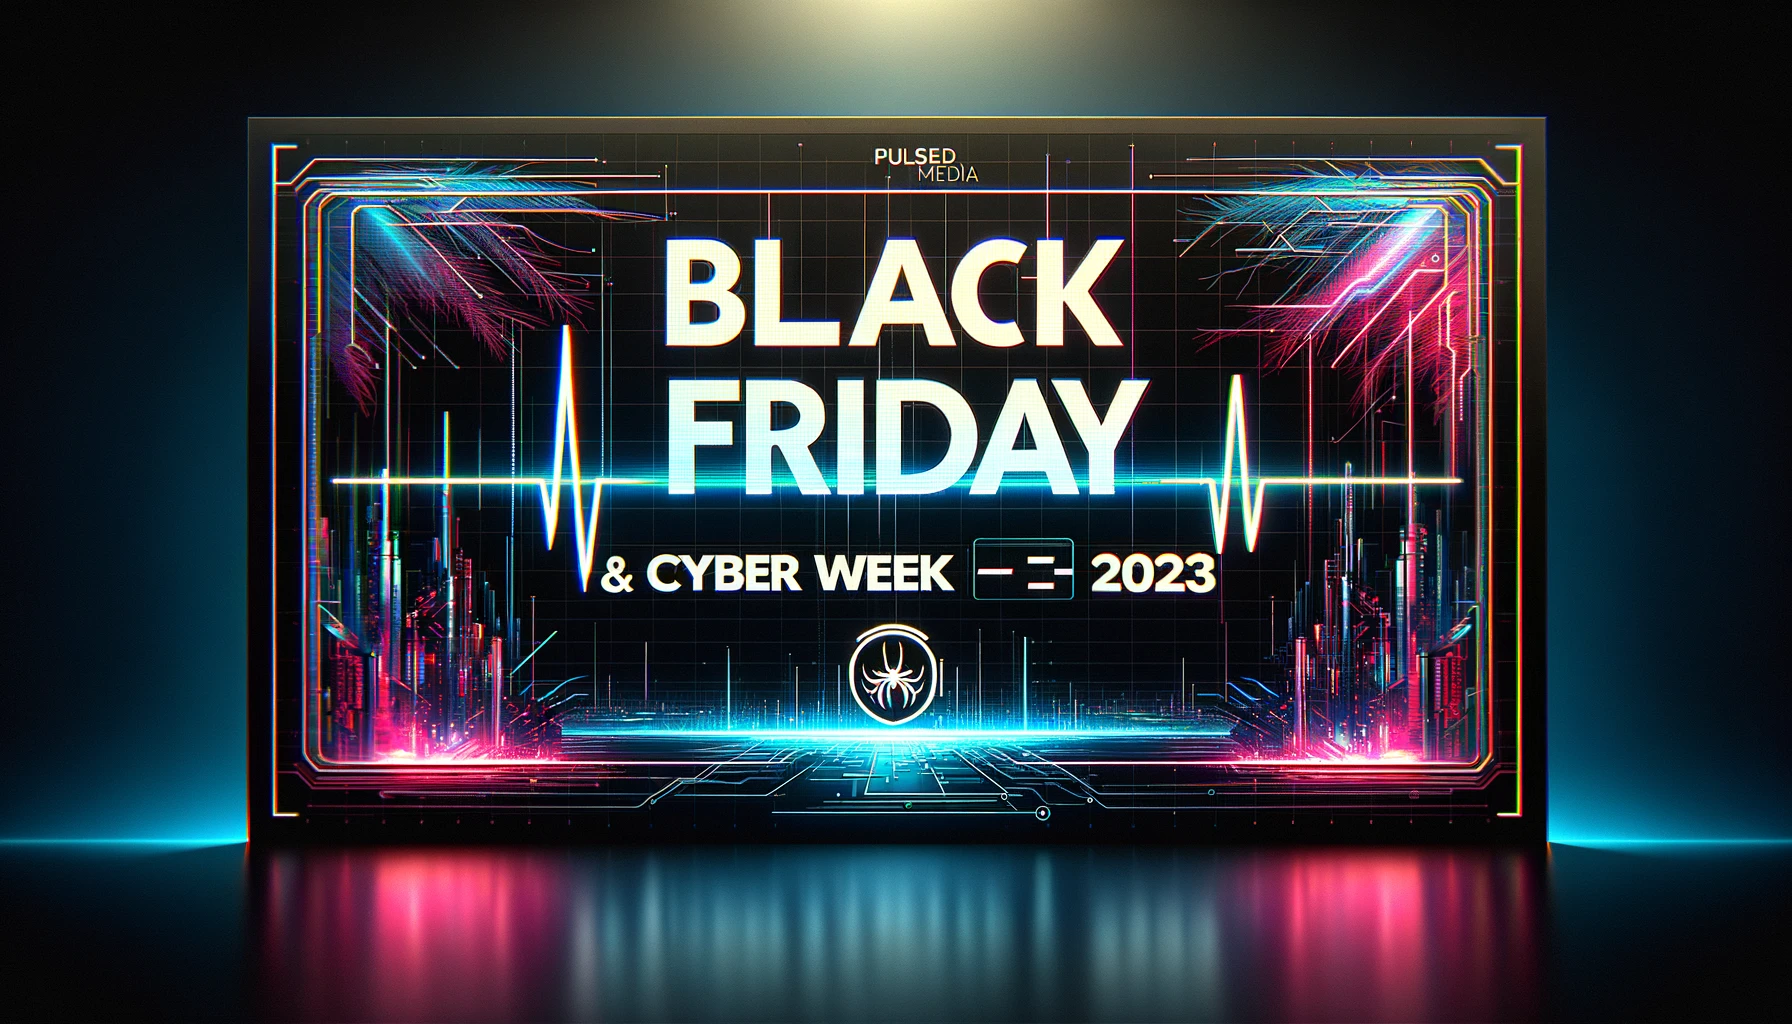 Pulsed Media BLACK FRIDAY 2023 and CYBER WEEK! 13.37€/YR LET EXCLUSIVE  DEALS INSIDE! PRIZES! — LowEndTalk